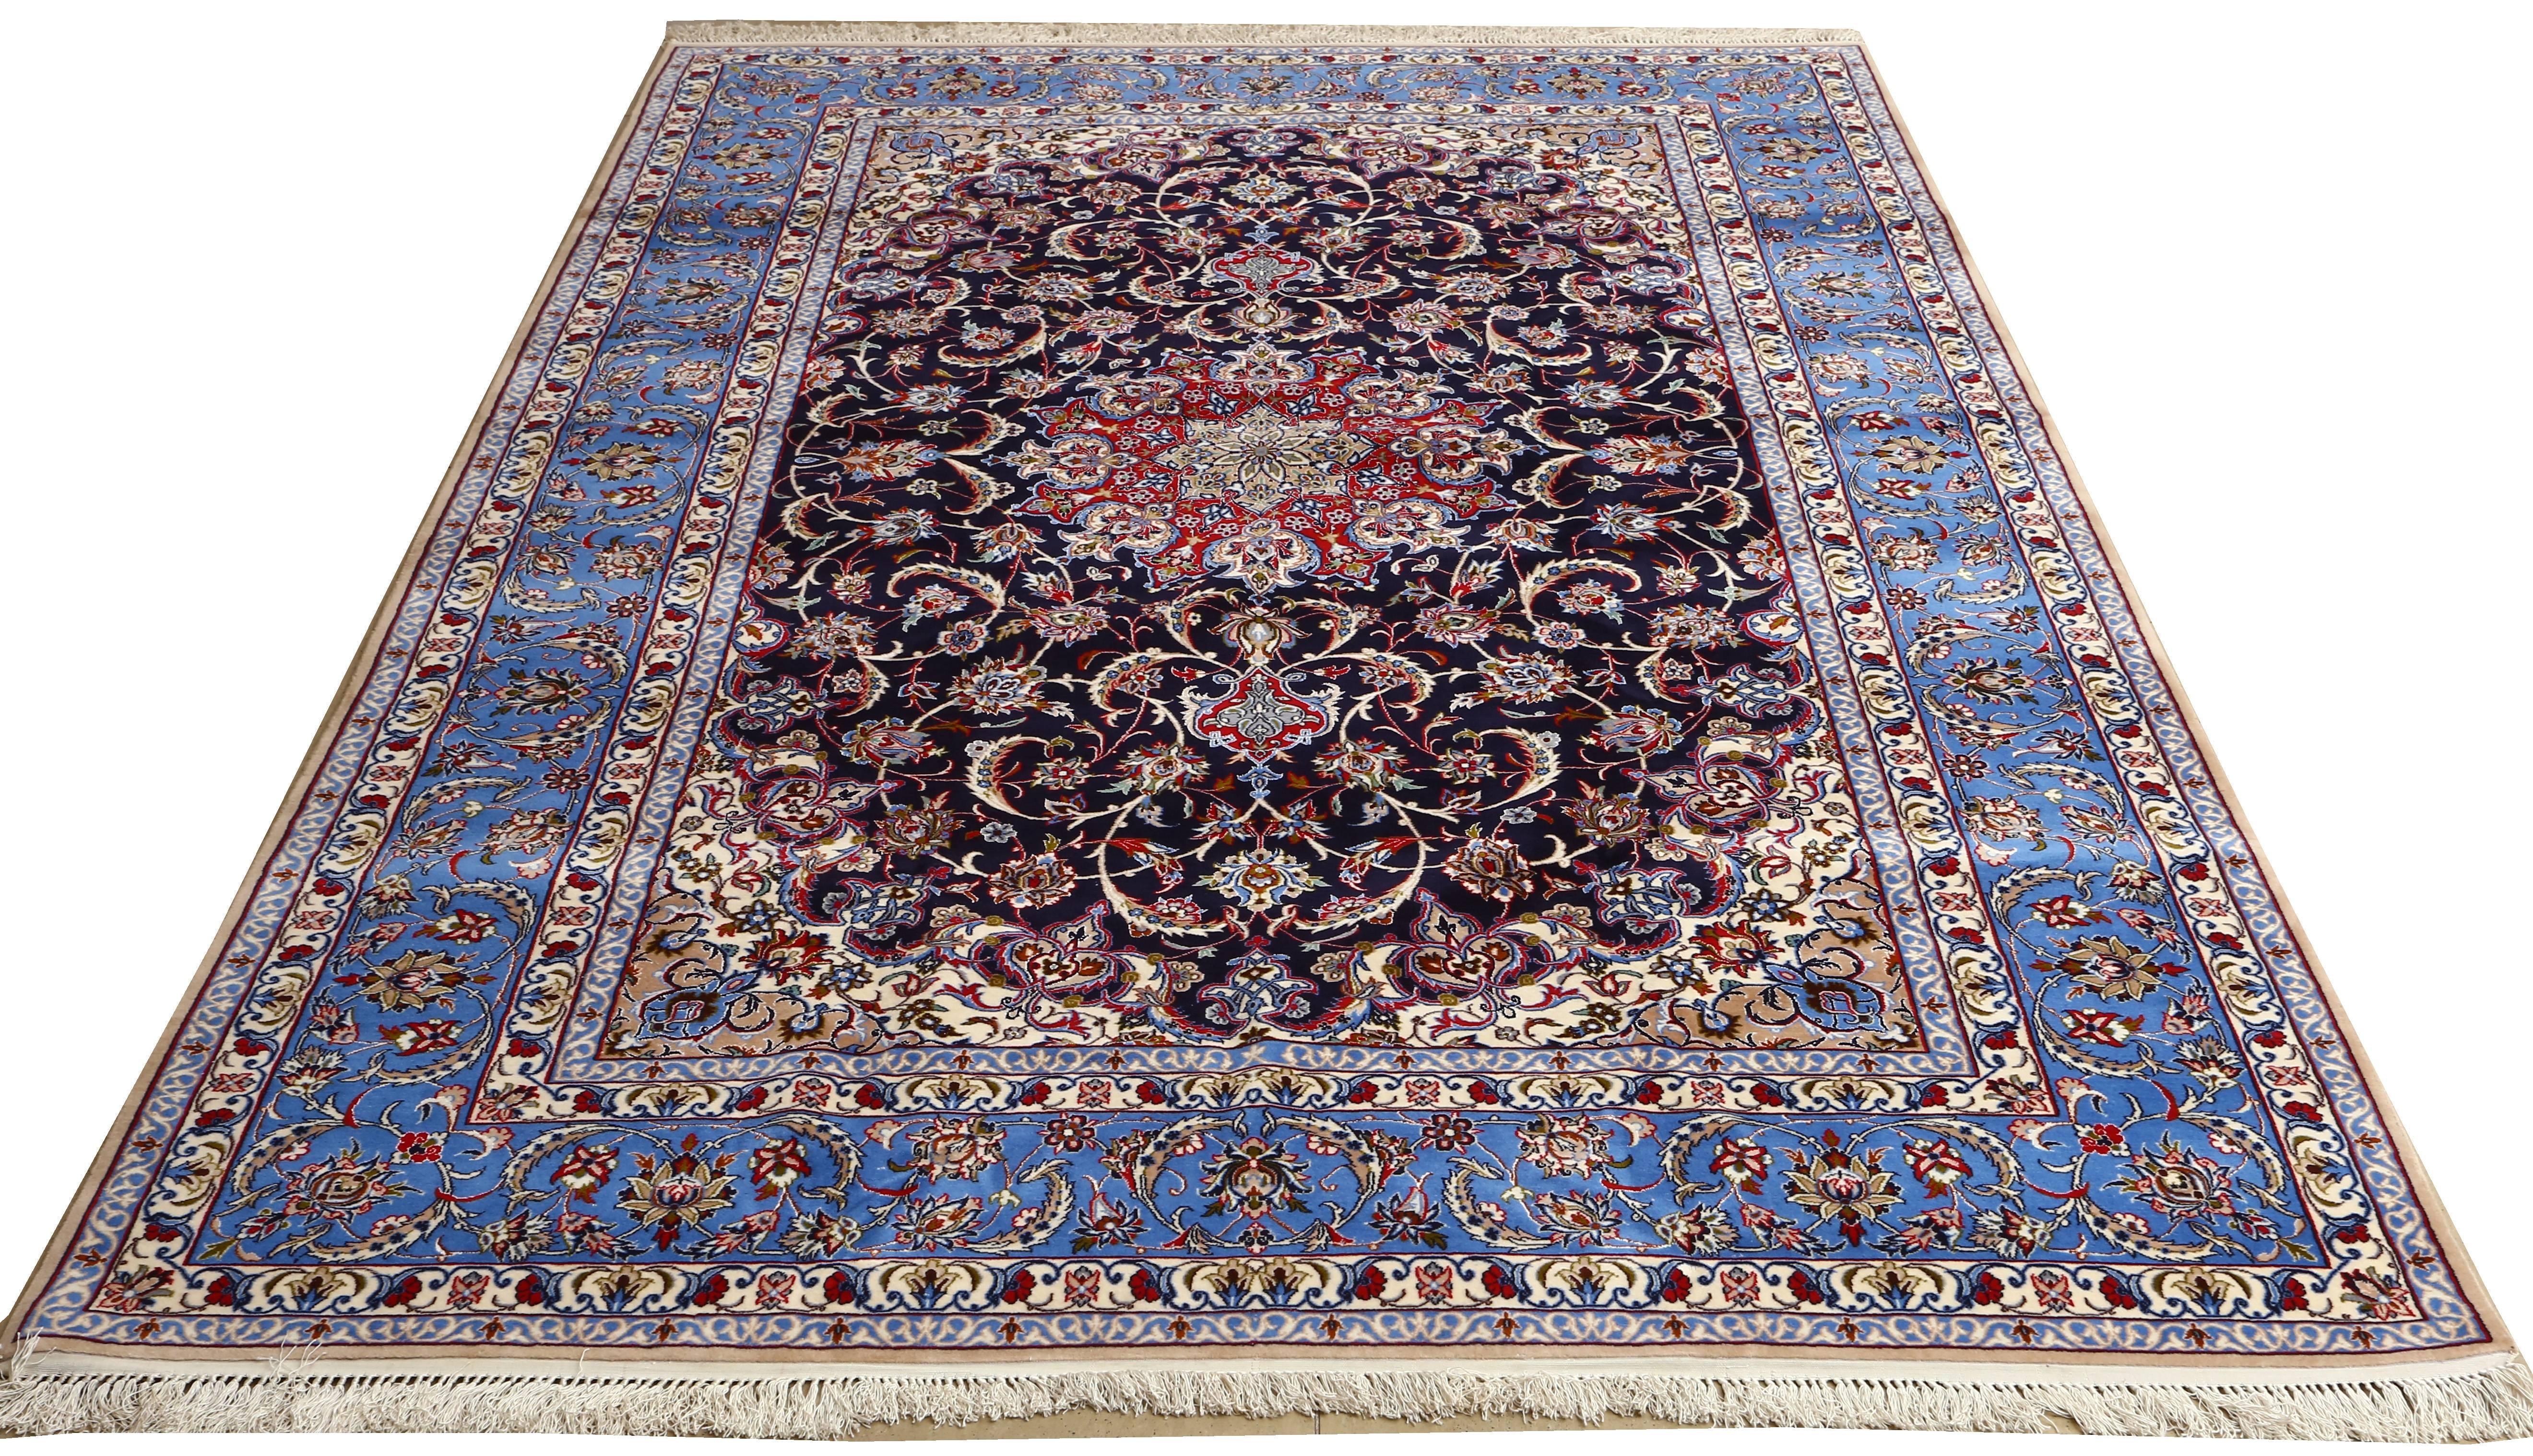 Vintage Isfahan Persian Rug. Size: 6 ft 7 in x 10 ft (2.01 m x 3.05 m) 3